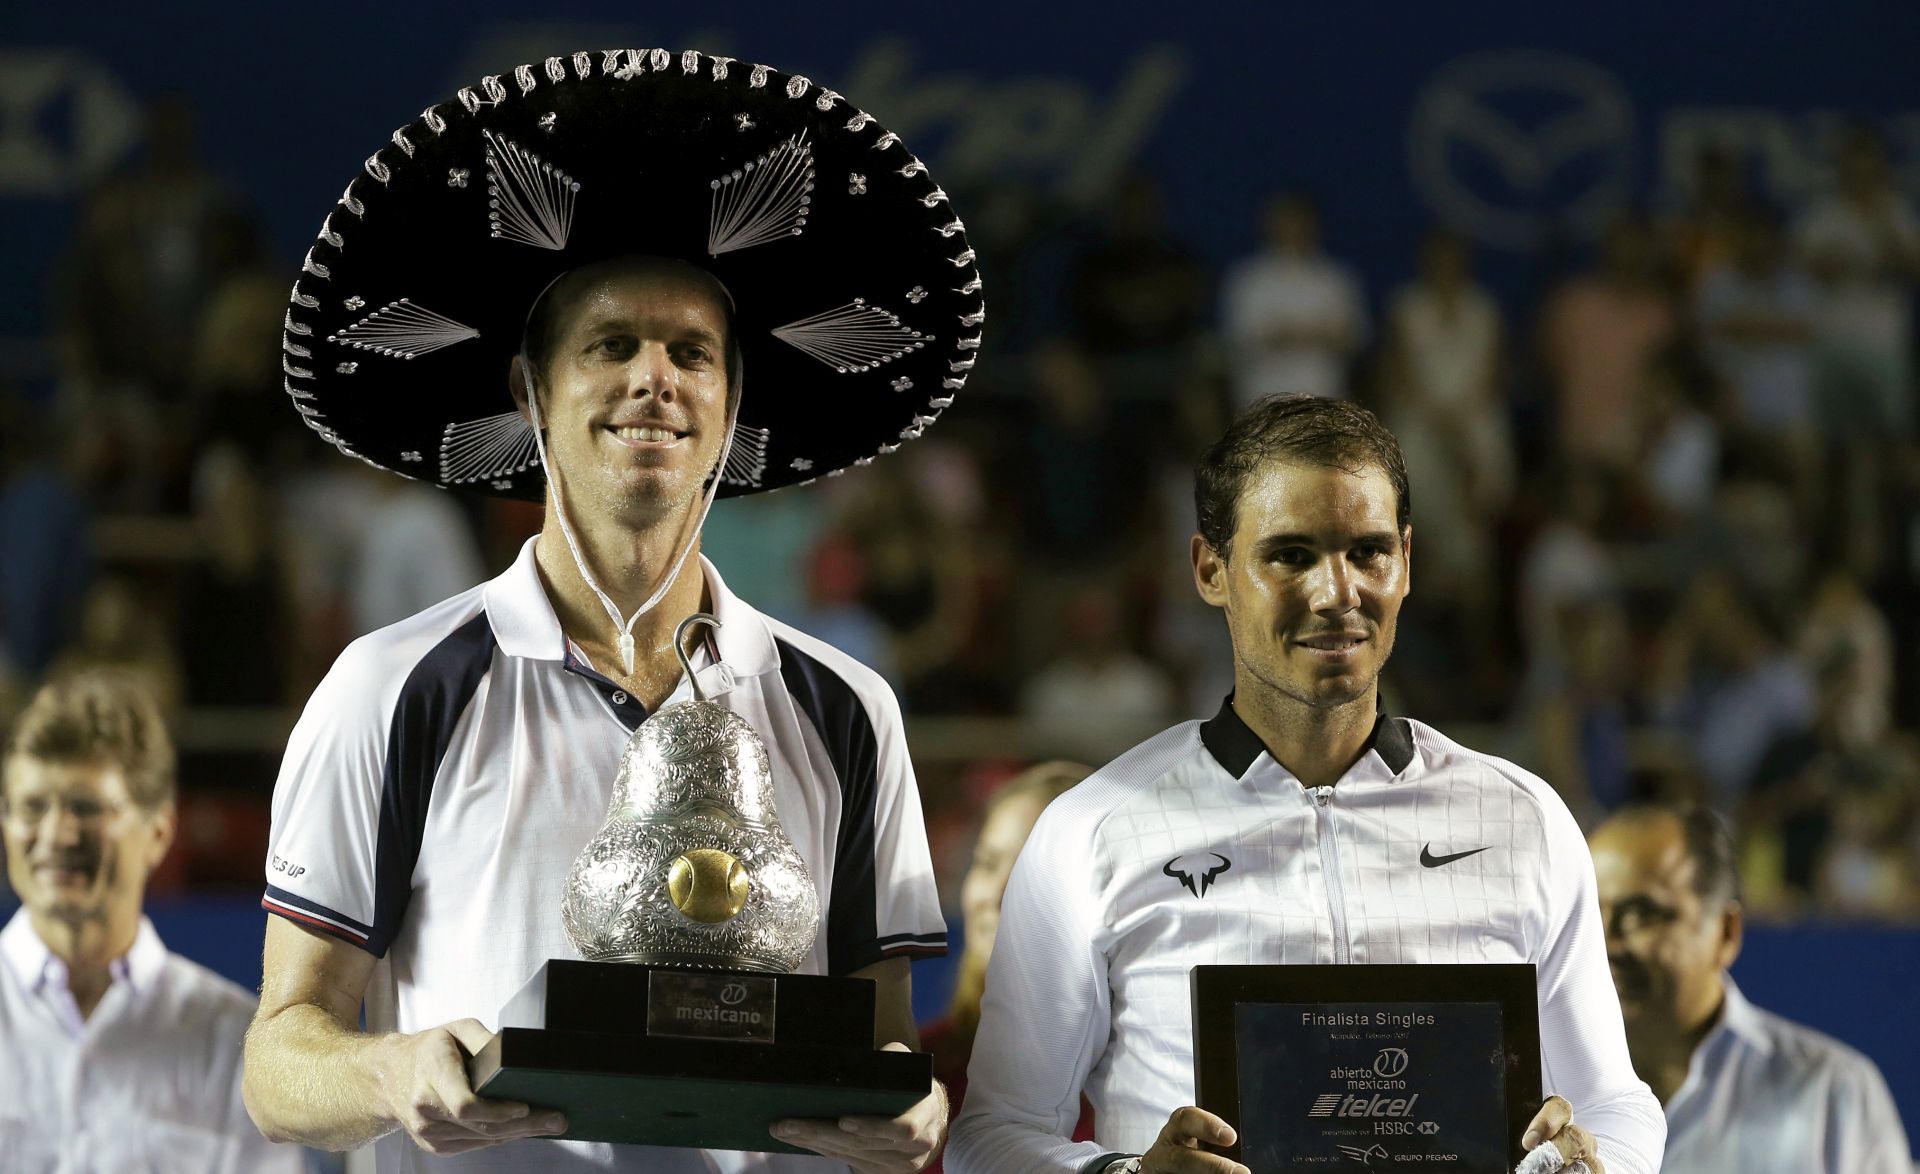 epa05830514 Sam Querrey of the USA (L) poses with the trophy after winning against Rafael Nadal of Spain (R) in their Men's final match at the Mexican Open tennis tournament in Acapulco, Mexico, 04 March 2017.  EPA/JOSE MENDEZ